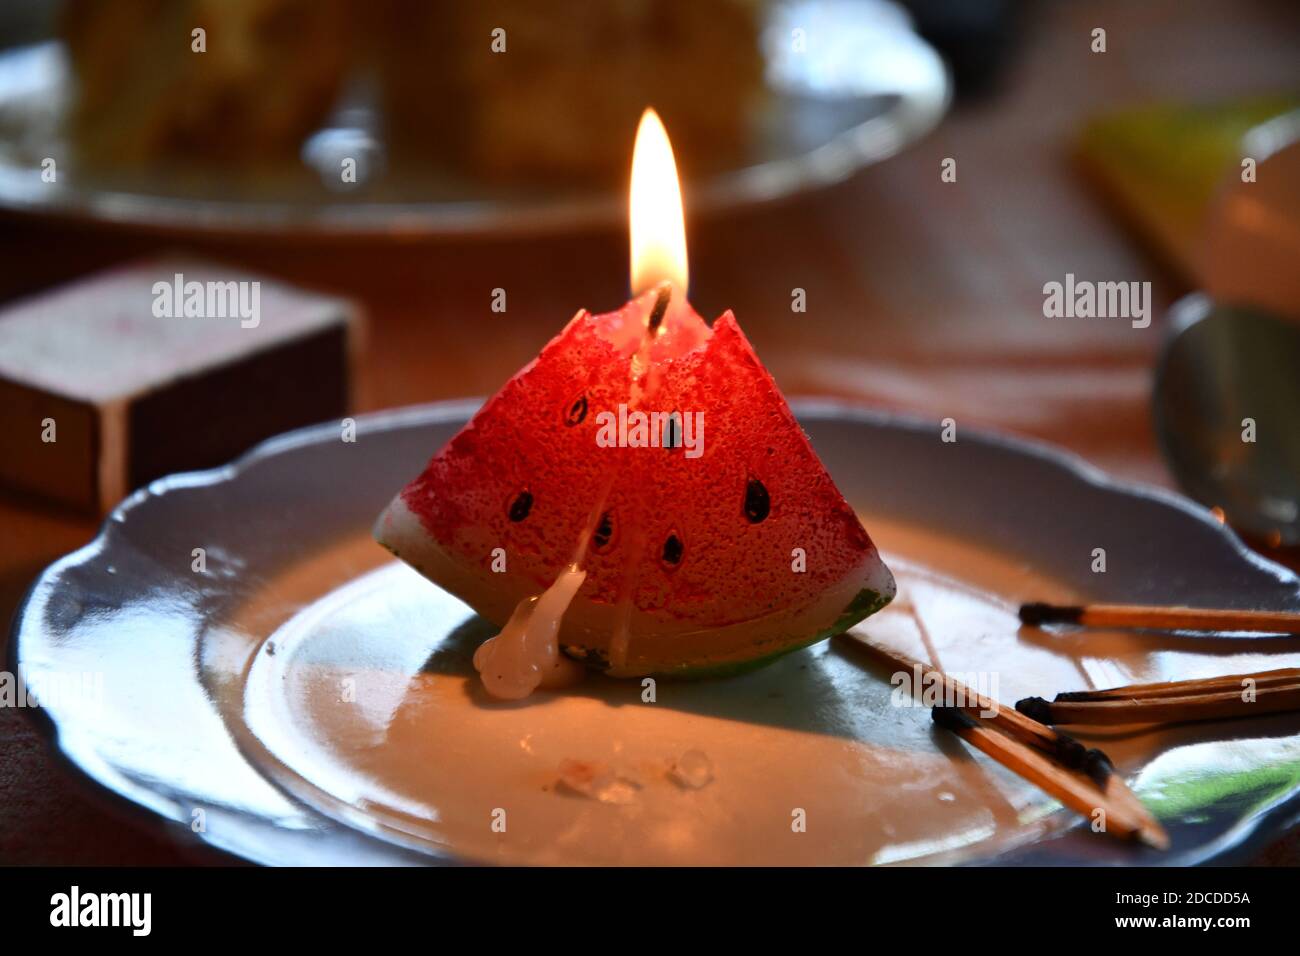 Melted candle in shape of triangle piece of watermelon. Candlelight flame closeup. Burning fire of candle on vintage plate with burnt matches nearby Stock Photo